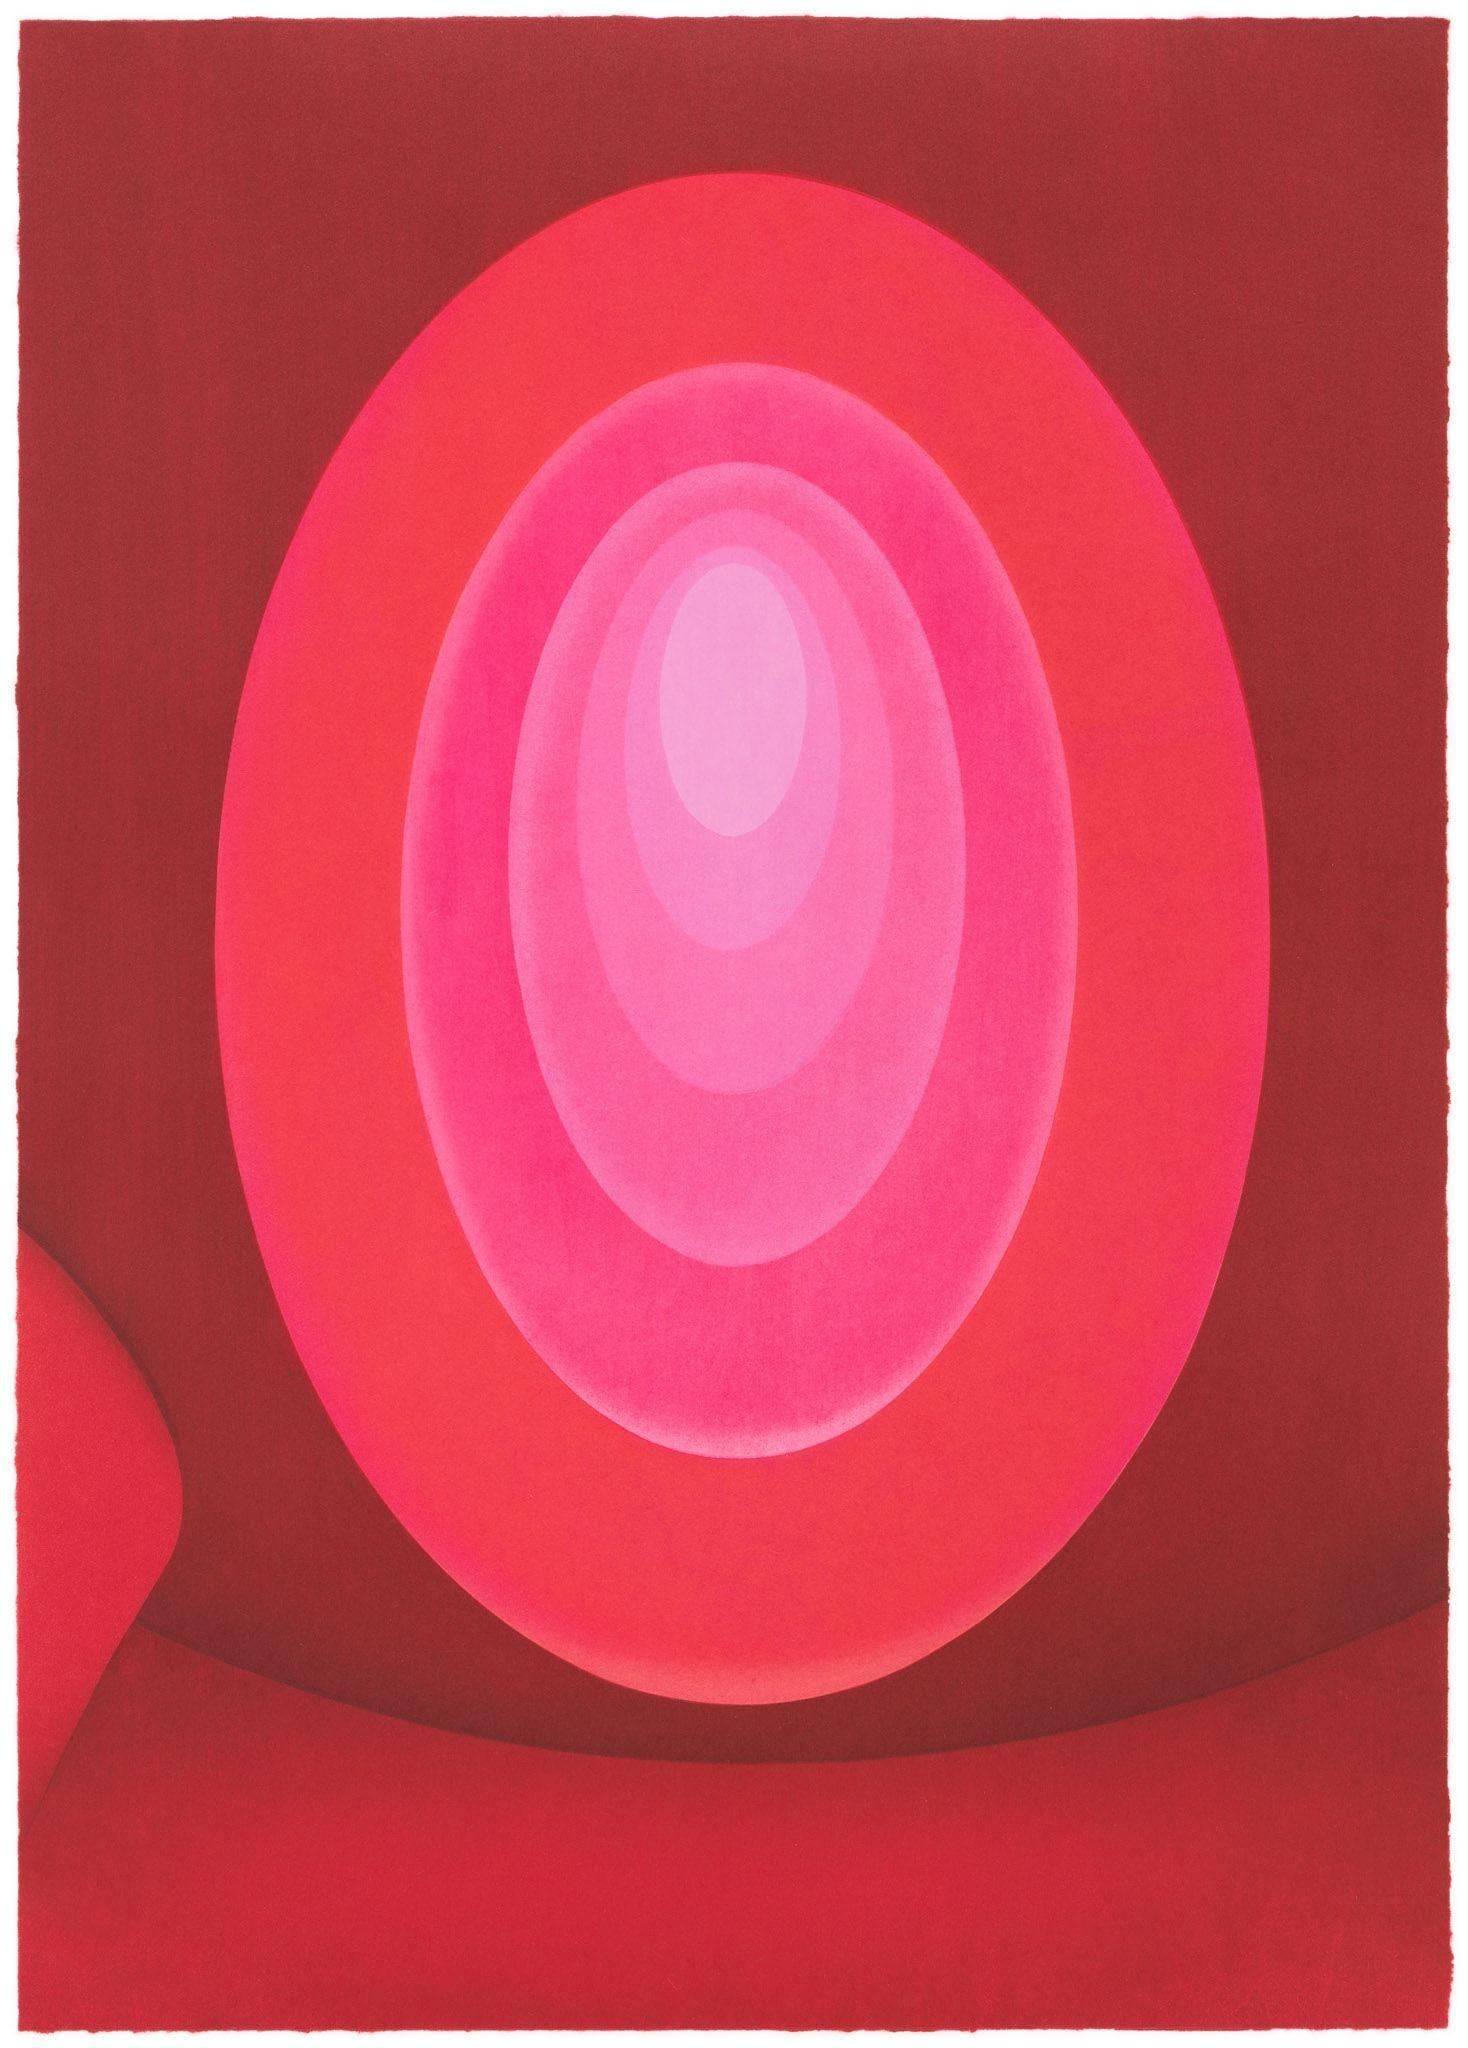 James Turrell Abstract Print - From Aten Reign